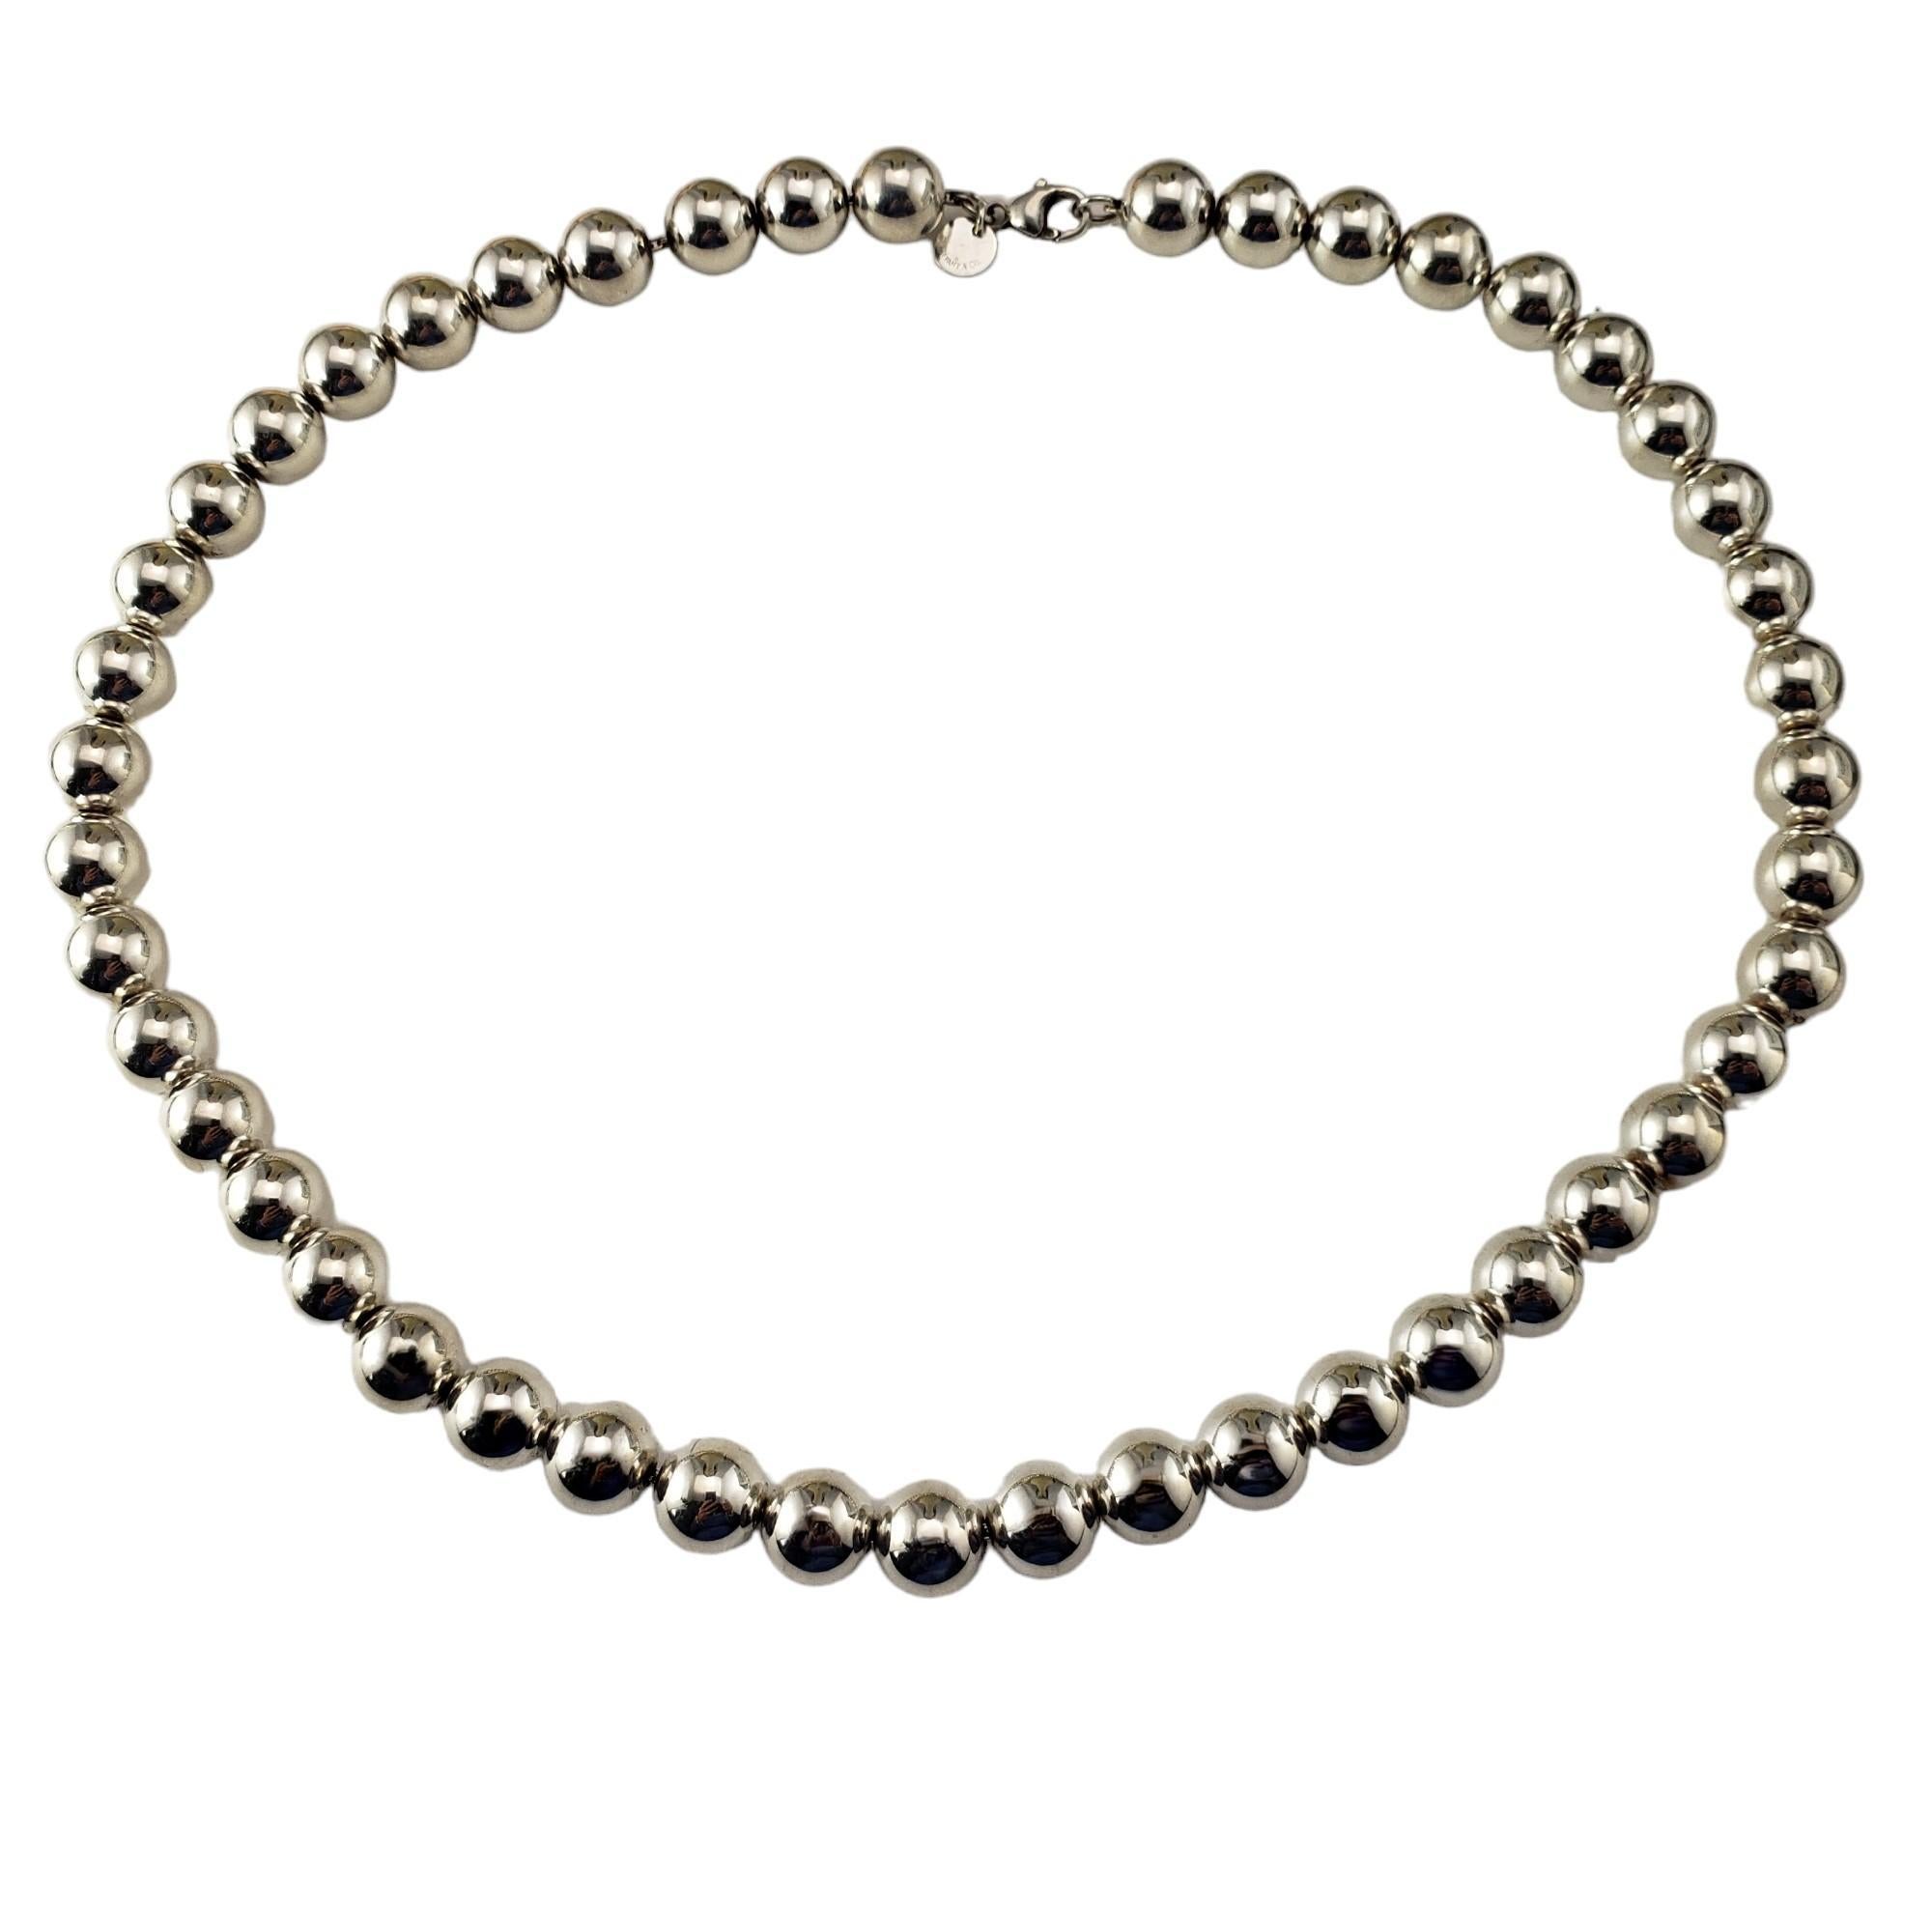 Tiffany & Co. Sterling Silver Ball Necklace-

This lovely ball necklace is crafted in elegant sterling silver by Tiffany & Co.  

Width: 10 mm.

Matching bracelet: #17162
Matching earrings: #17163

Size: 18 inches

Hallmark:  TIFFANY & CO.